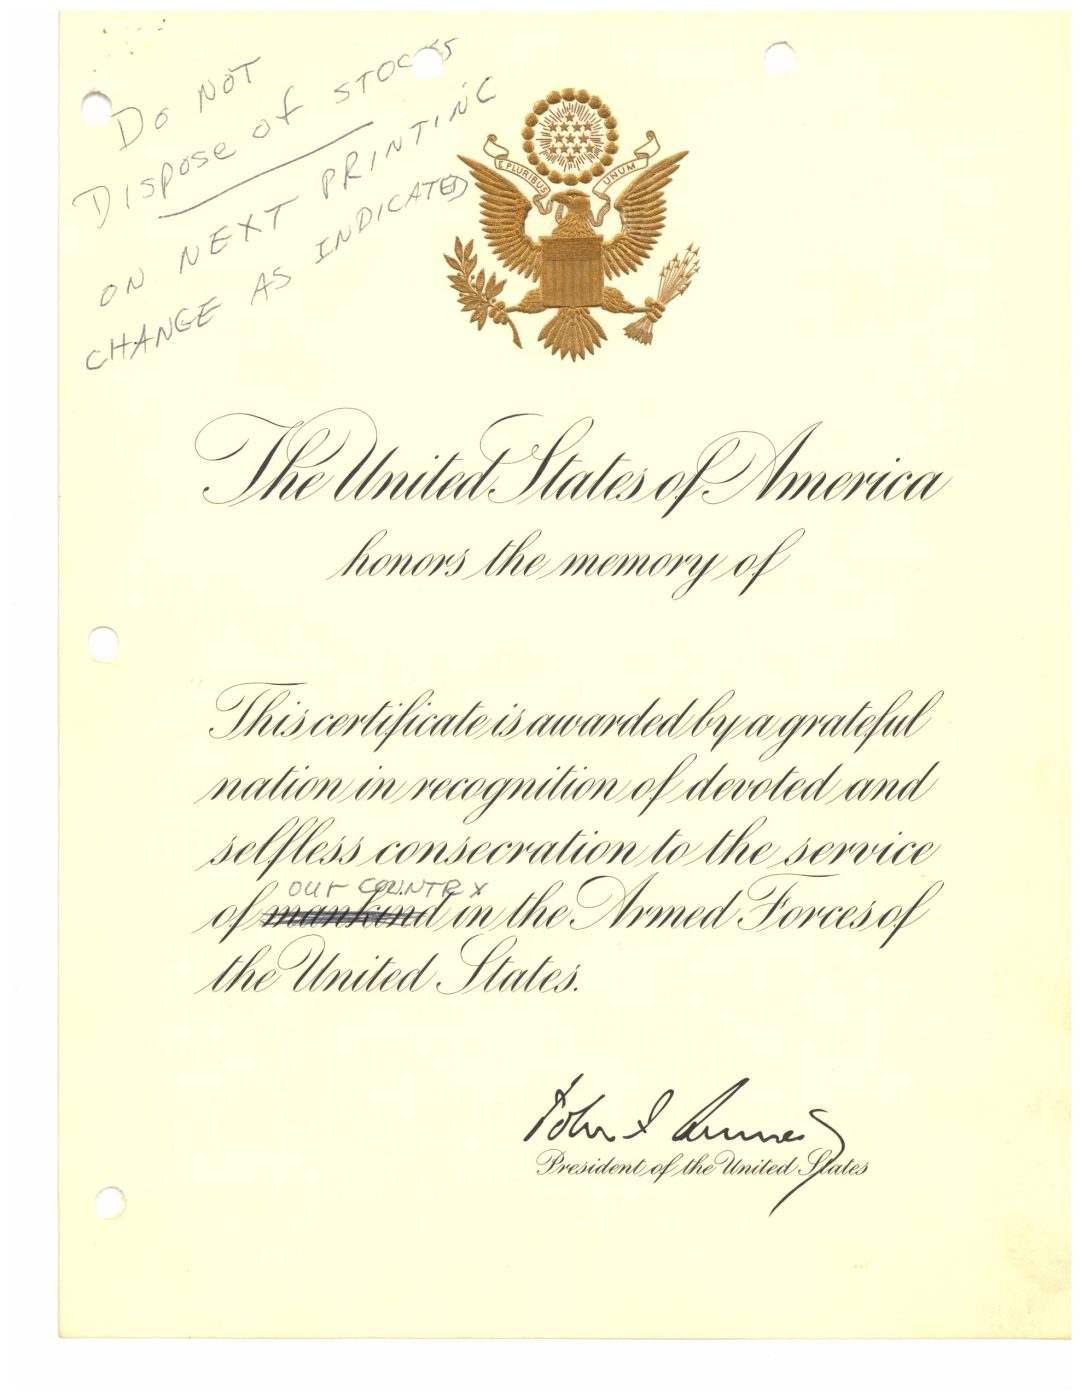 Presidential Memorial Certificate marked with changes in the wording requested by President John F. Kennedy, Jr. in September 1962. VA issued the gold-embossed certificates to family members of deceased Veterans to honor their military service. (NCA)